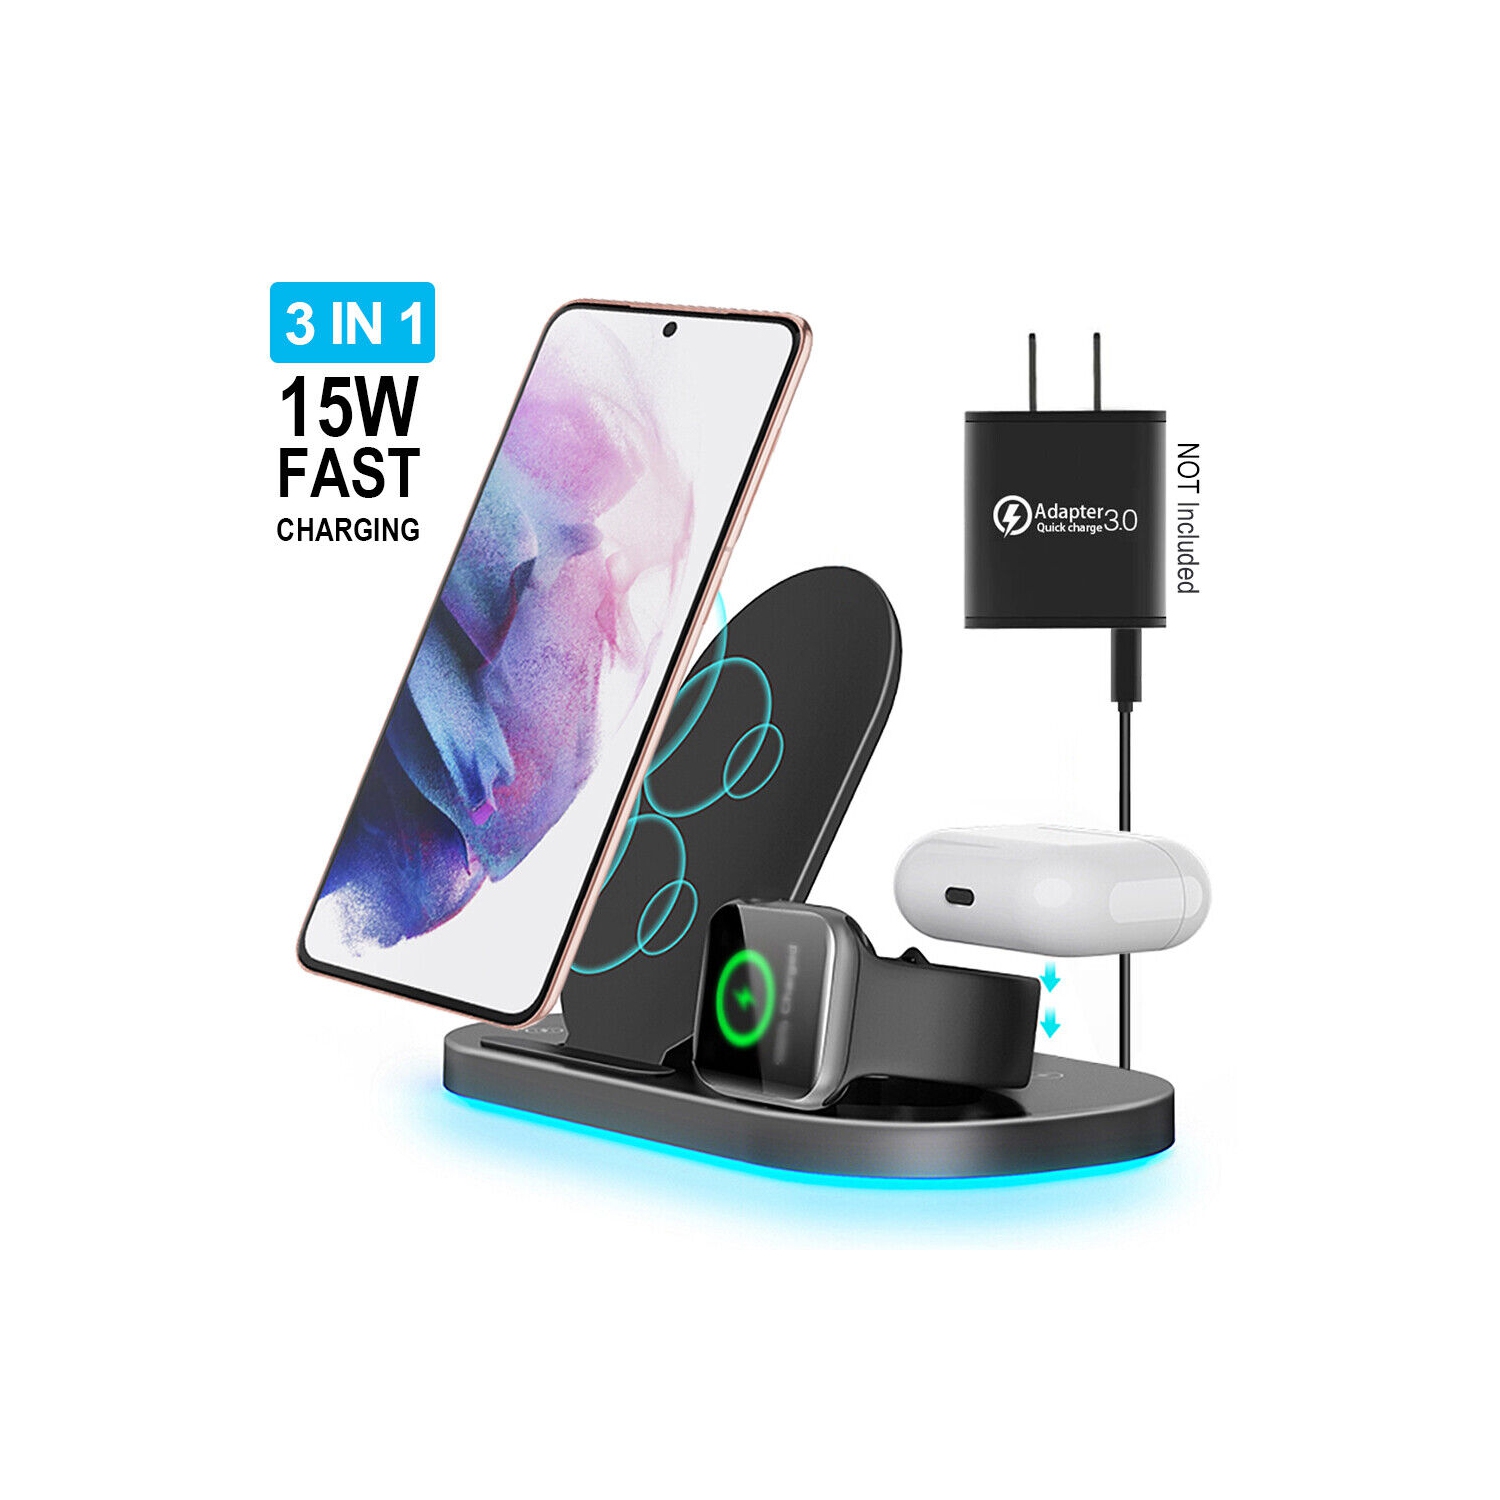 3 in 1 15W Fast Charging Pad Dock for Apple iPhone/iWatch Series, Samsung Galaxy